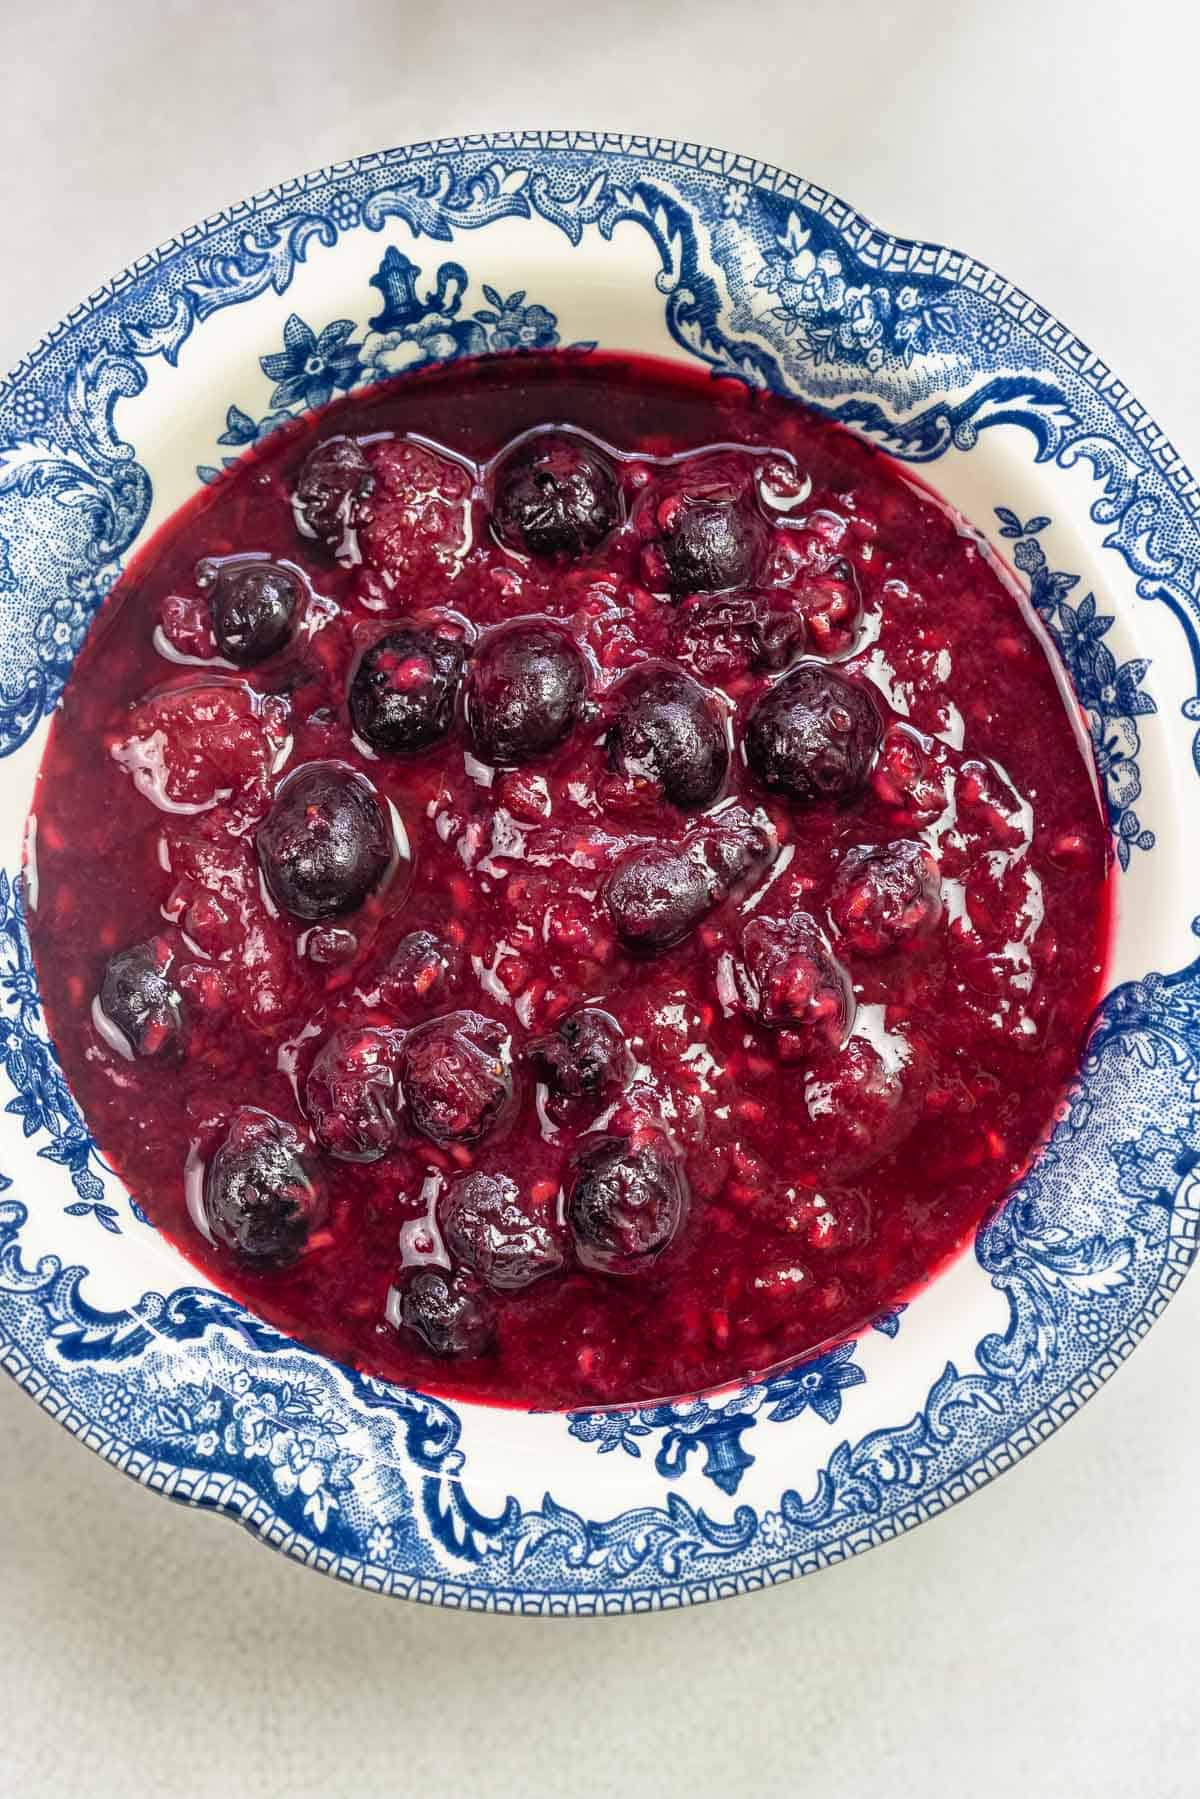 What Is a Fruit Compote?